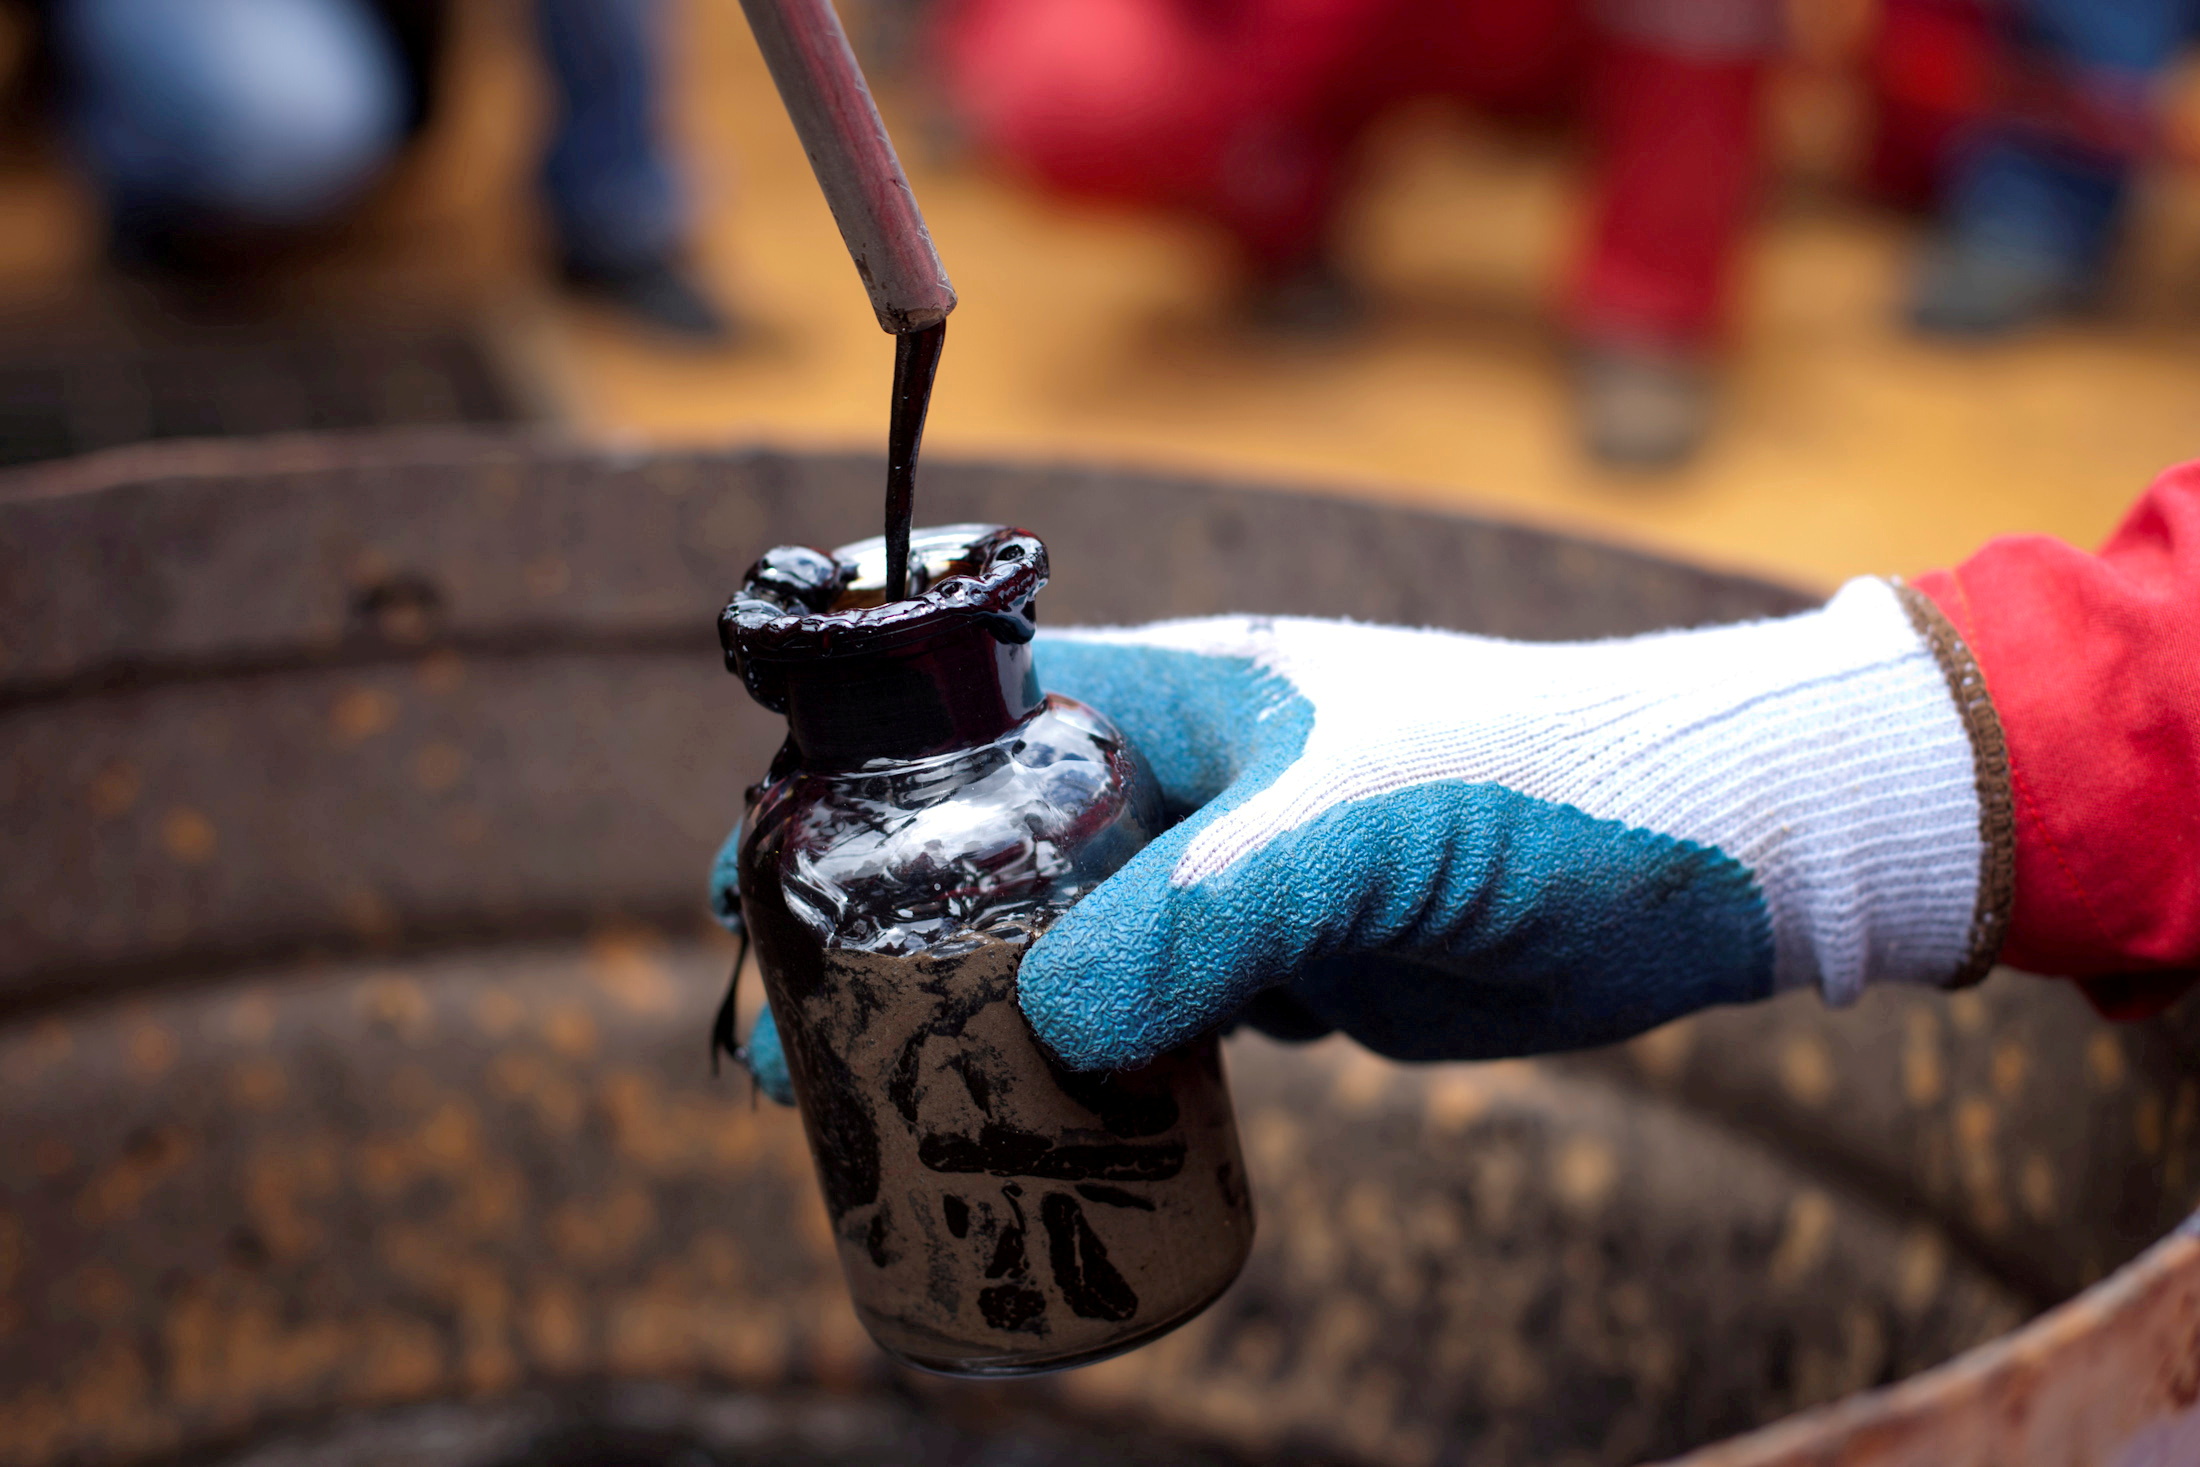 A worker collects a crude oil sample at an oil well operated by Venezuela's state oil company PDVSA in Morichal